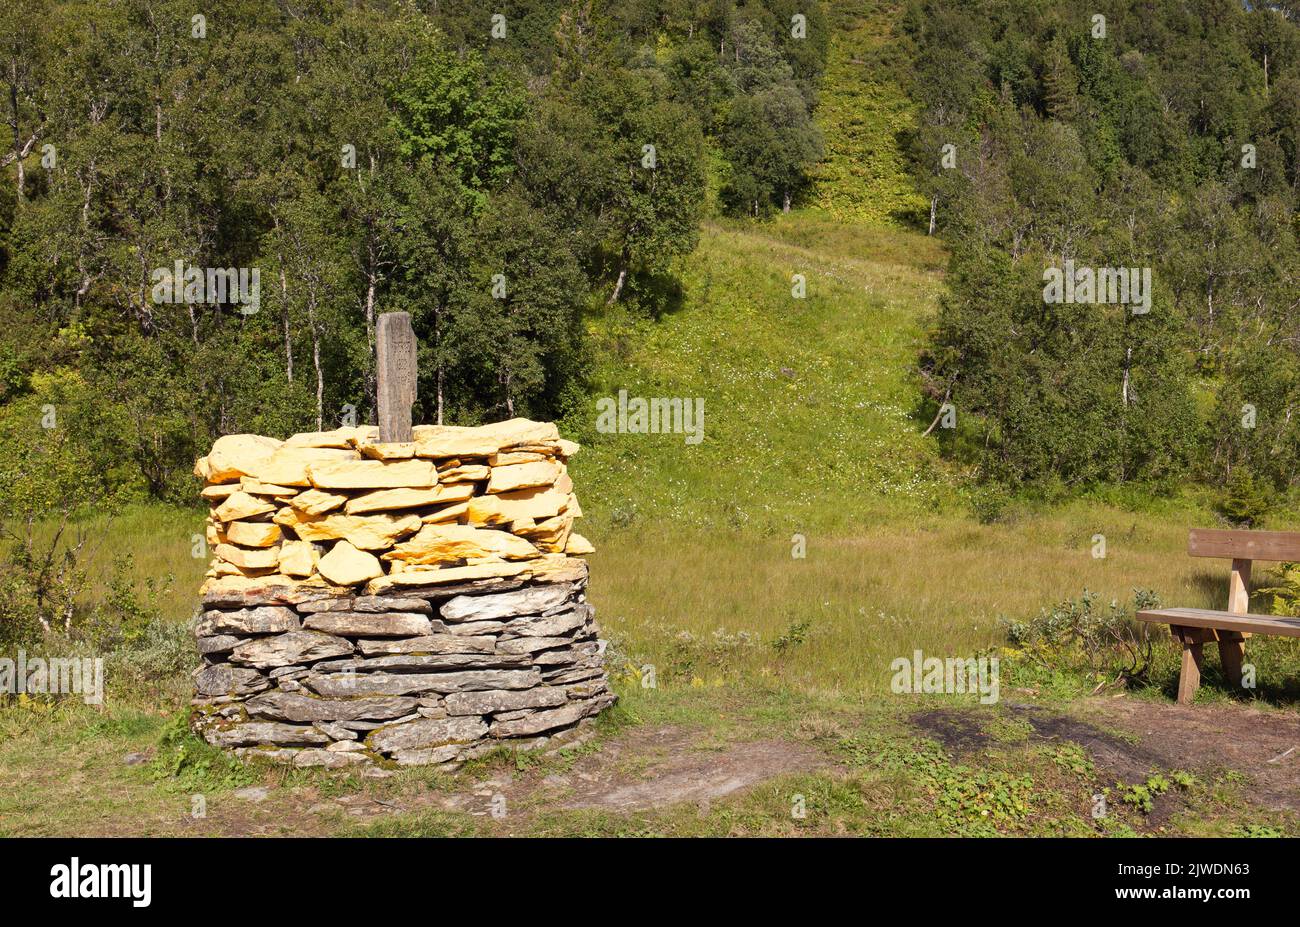 A yellow country chain between Sweden and Norway. Border, hill and wood in the background. Bright sunshine. Stock Photo